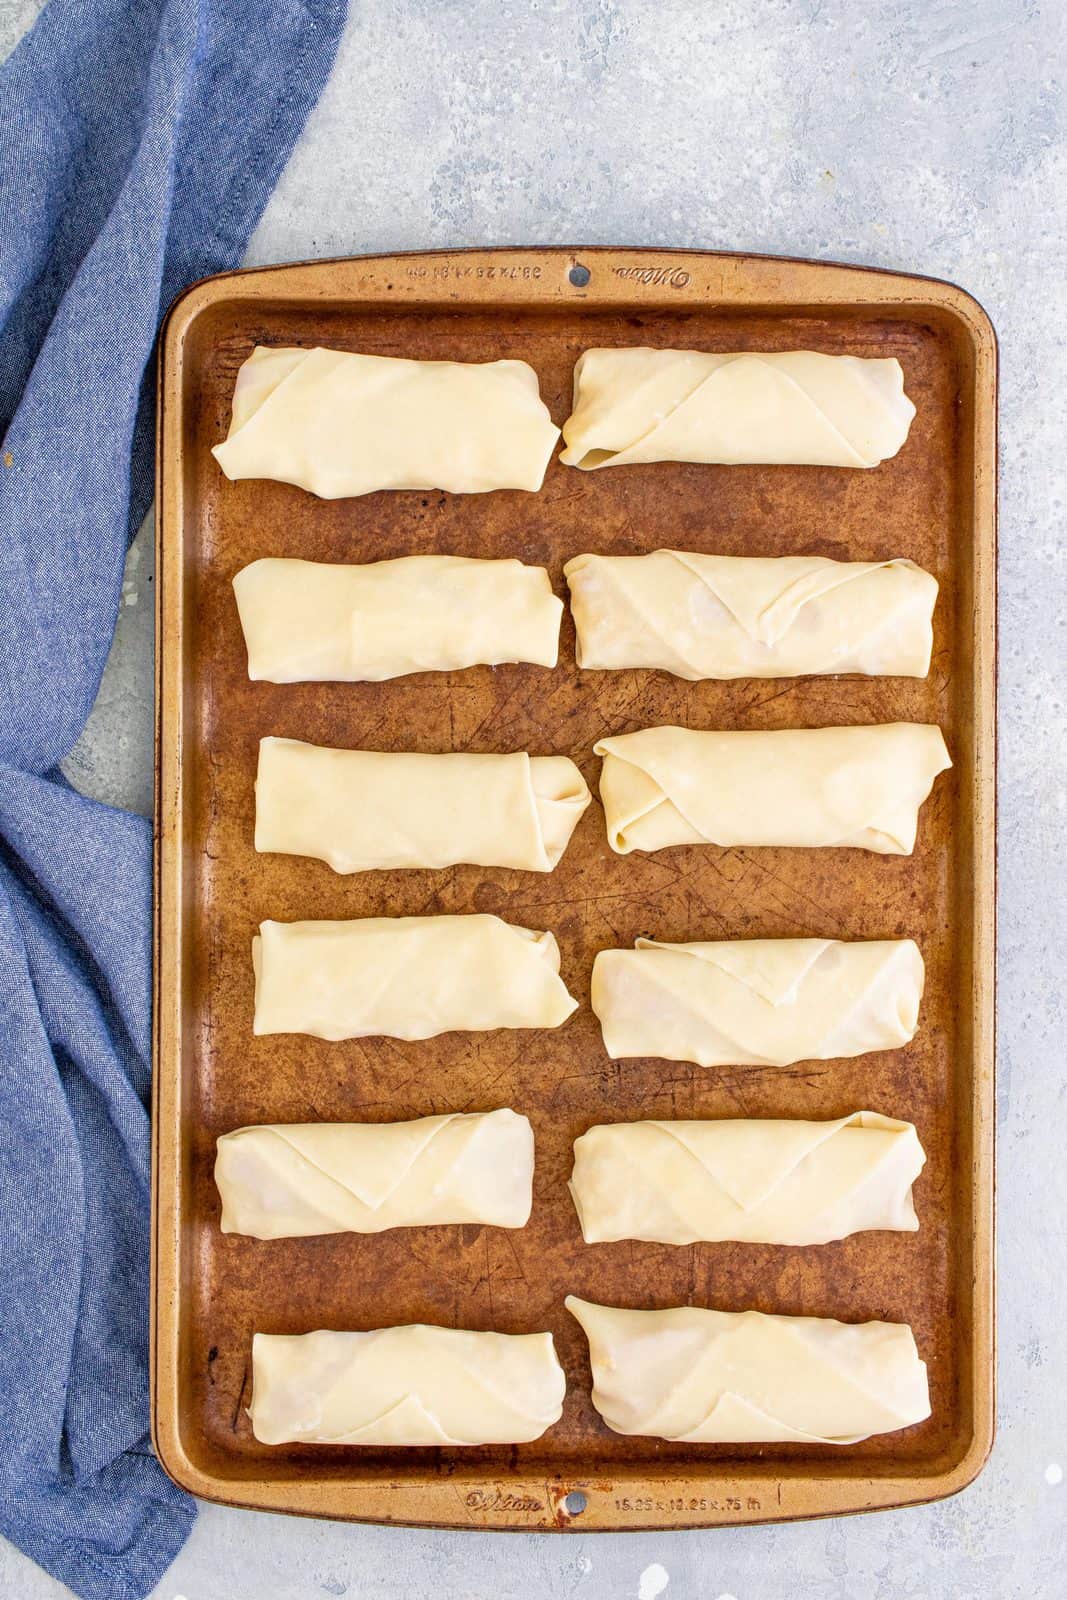 Rolled egg rolls on baking pan.